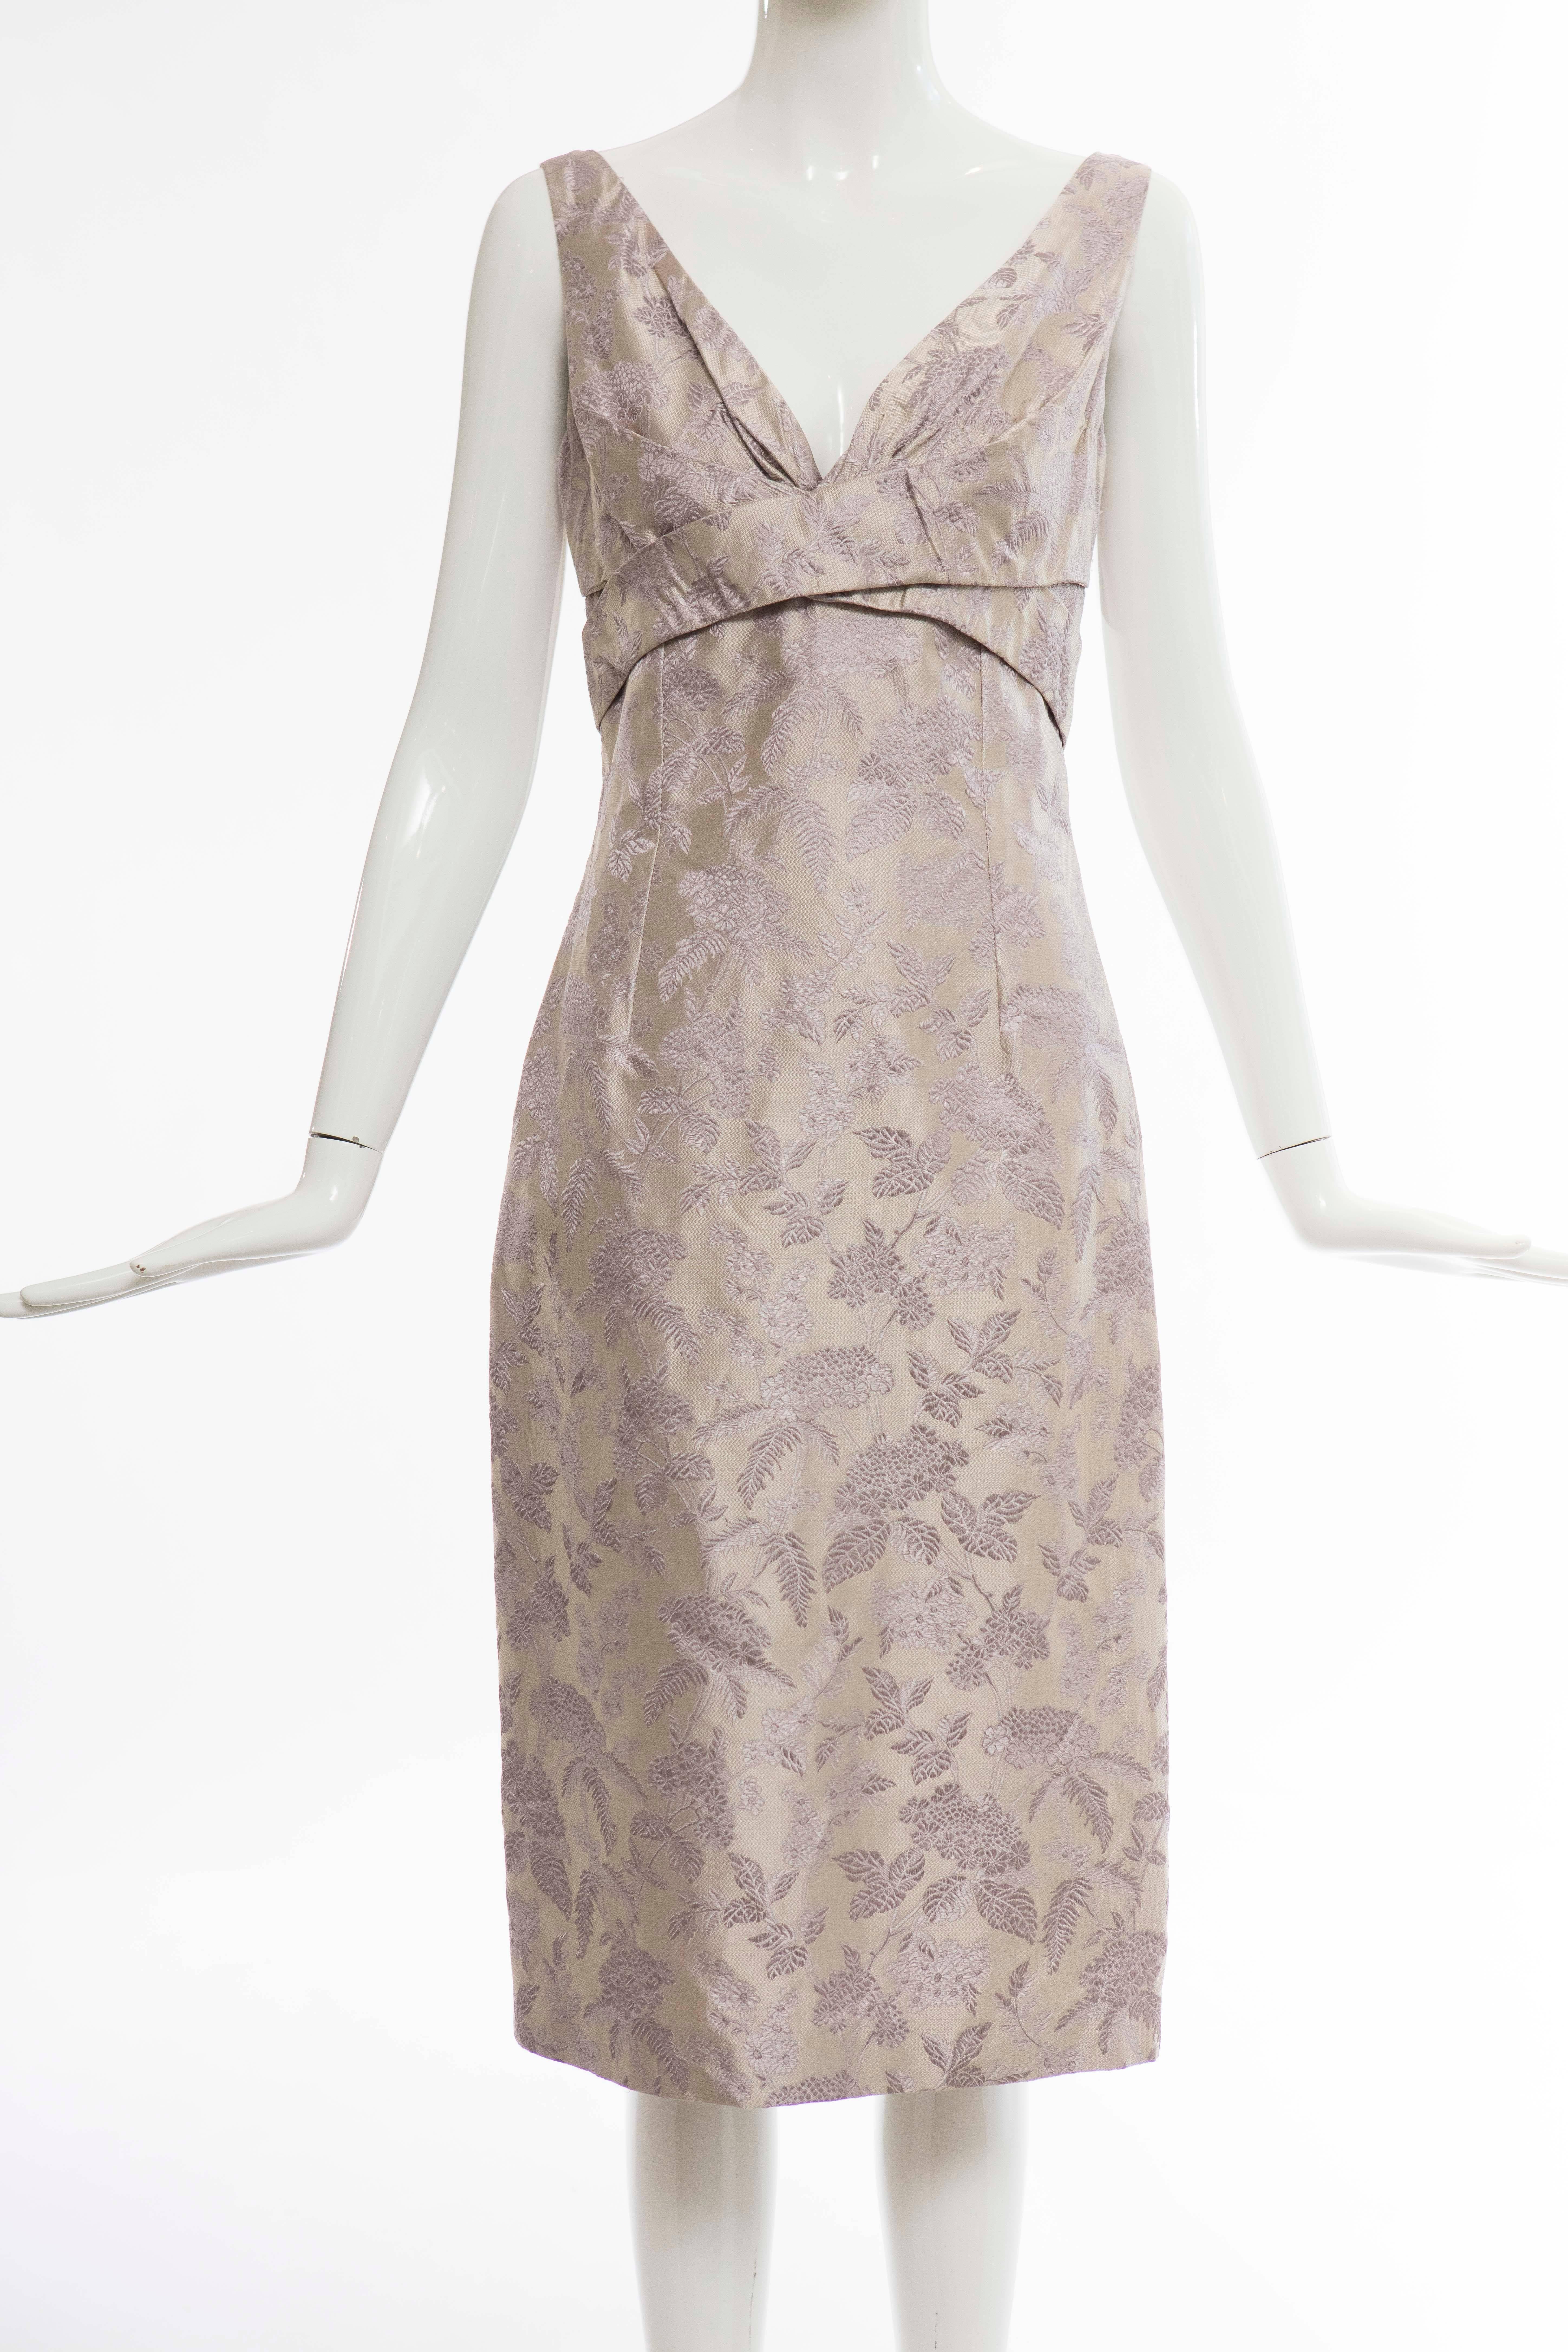 Alexander Mcqueen, Spring 2006 sleeveless lavender silk jacquard dress,fully lined with  back zip and hook-and-eye closure.

Retail: $1995

EU. 40
US. 4

Bust 32, Waist 27, Hips 35, Length 42